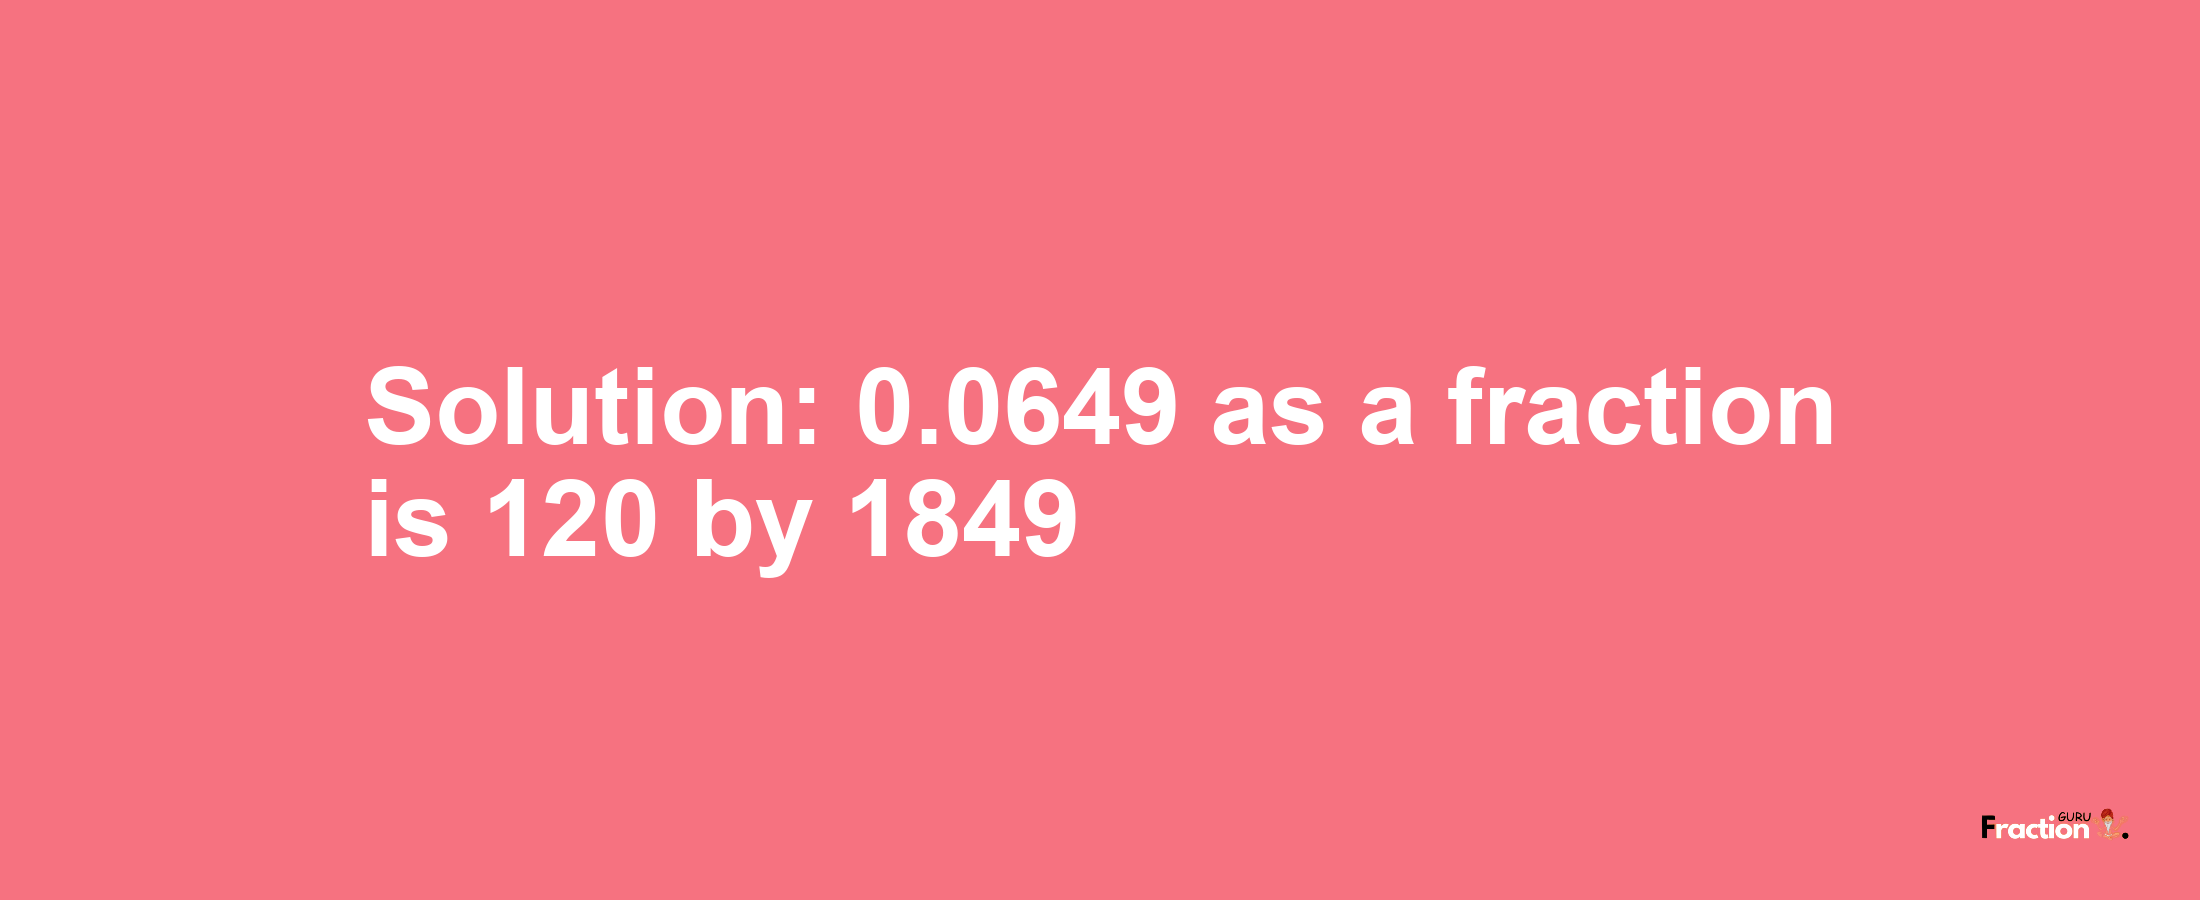 Solution:0.0649 as a fraction is 120/1849